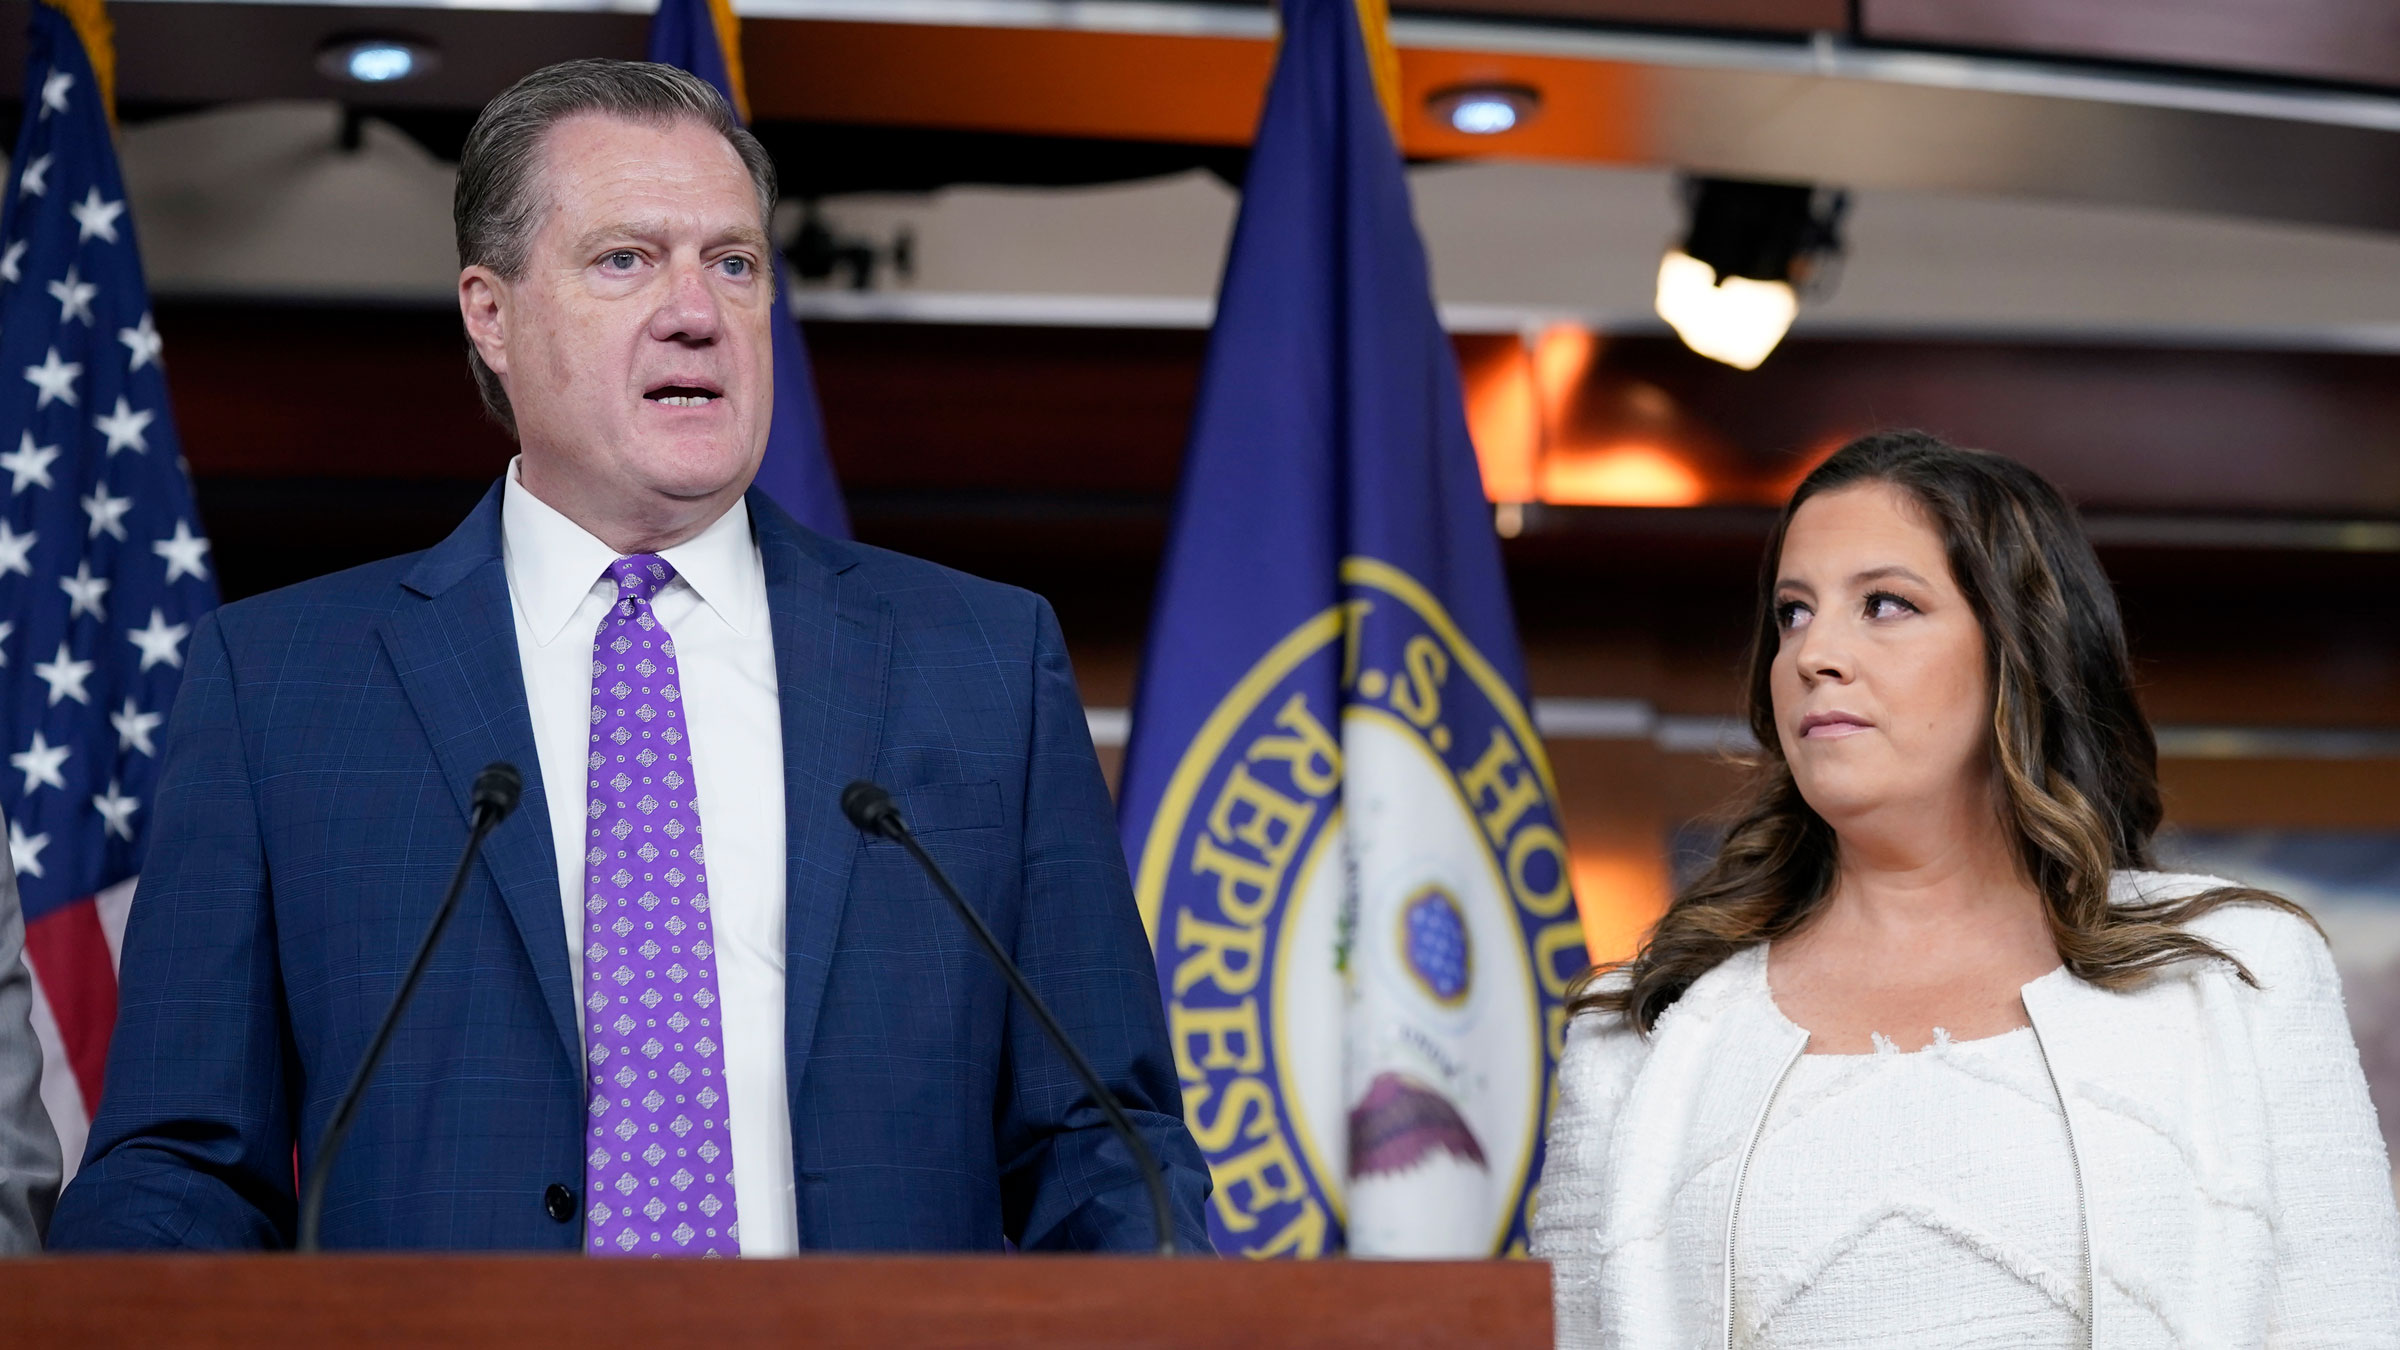 US Rep.  Mike Turner speaks at a press conference on Capitol Hill on Friday.  On the right is US Representative Elise Stefanik.